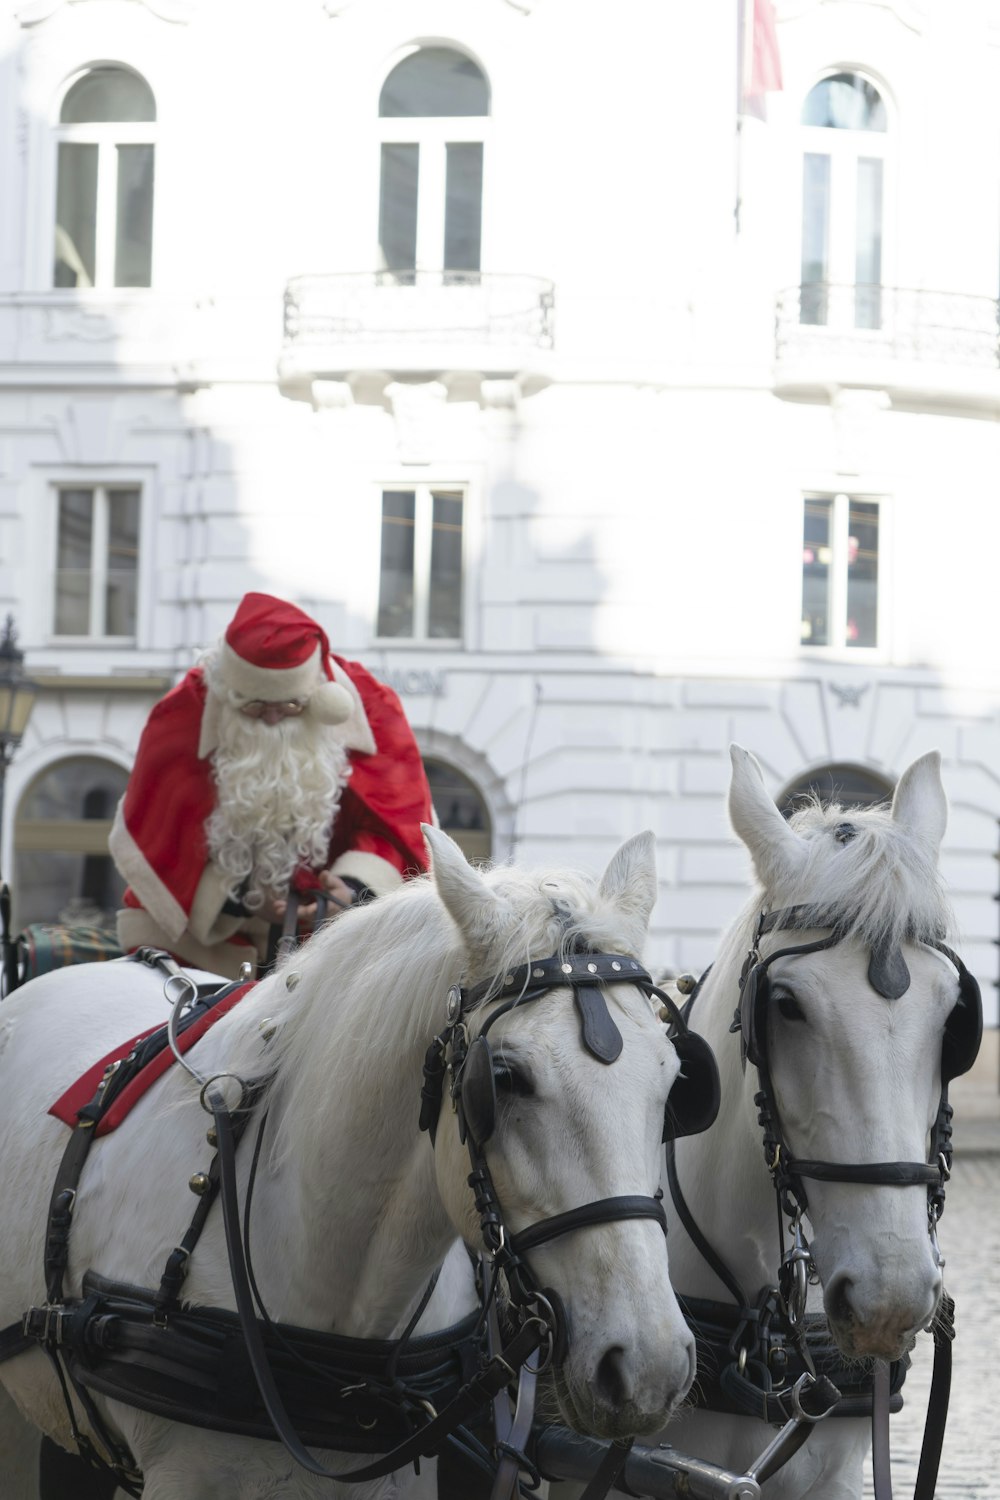 a man dressed as santa claus riding on a horse drawn carriage